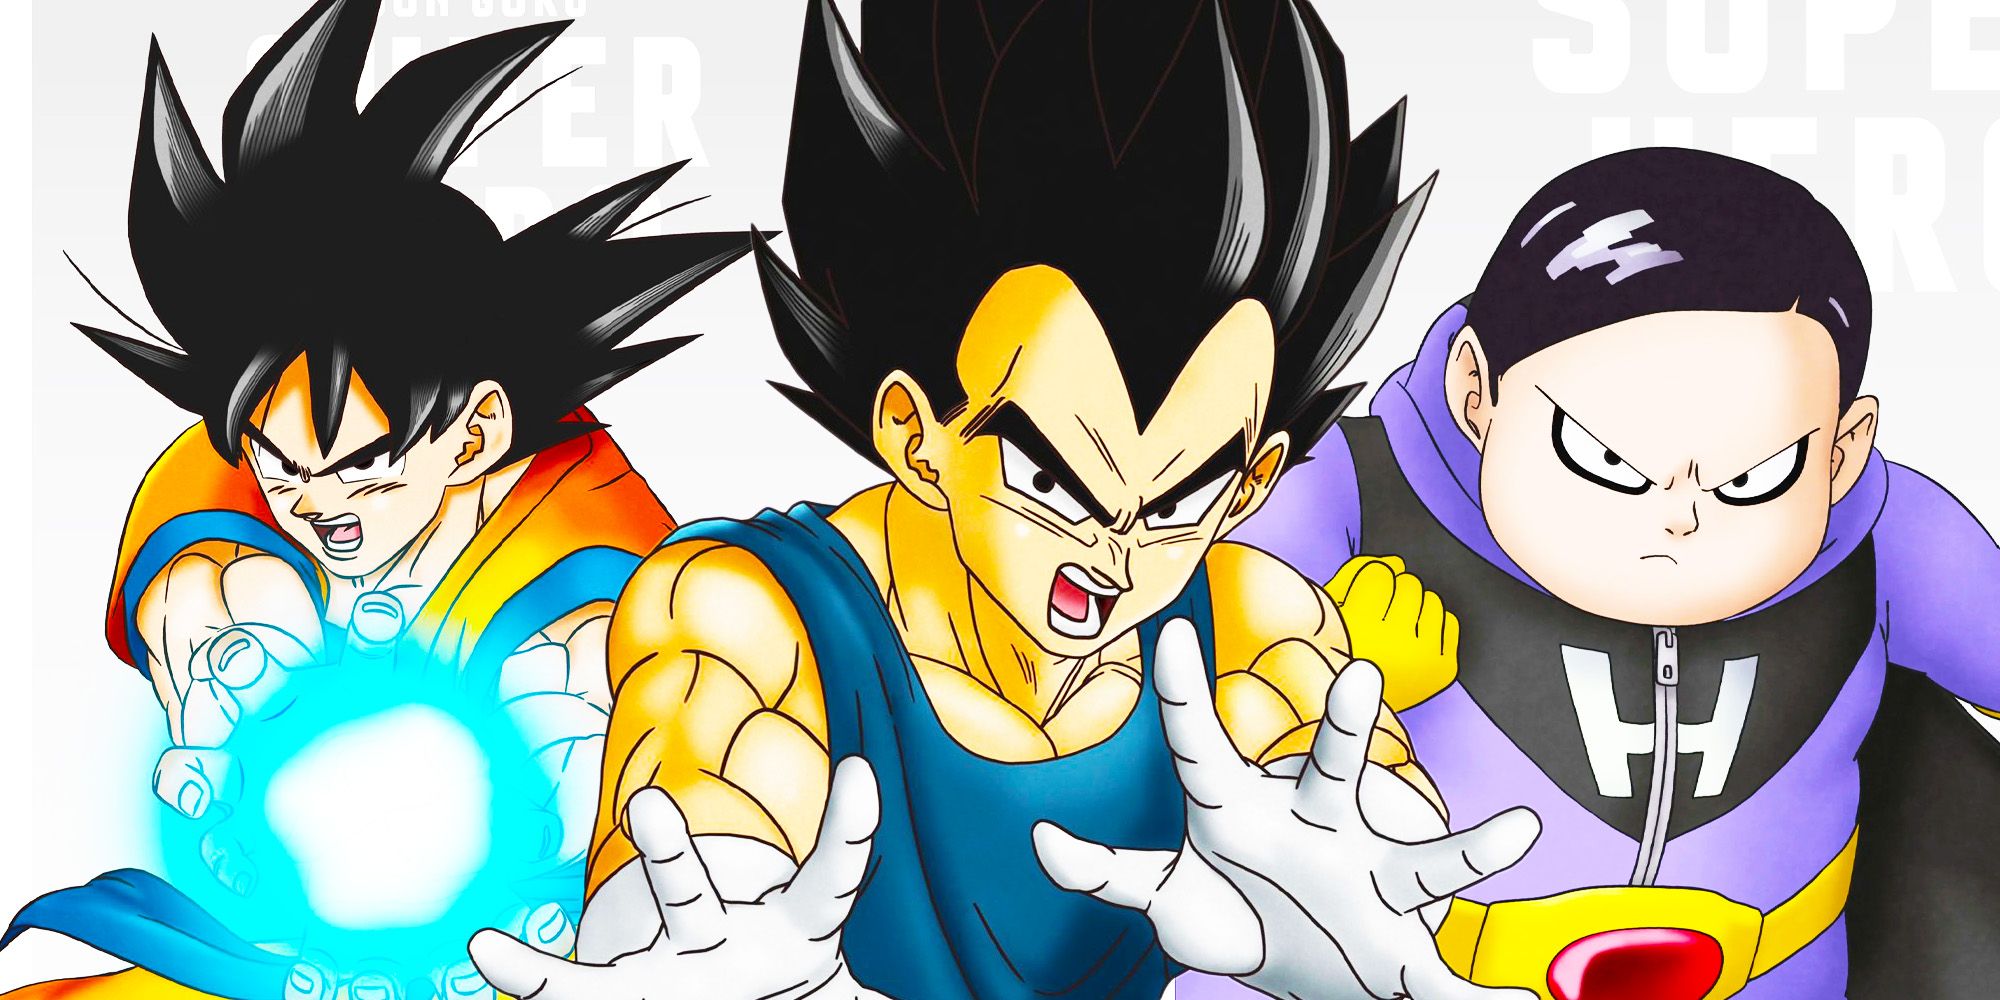 Dragon Ball Super: Super Hero spoilers reveal everything from new